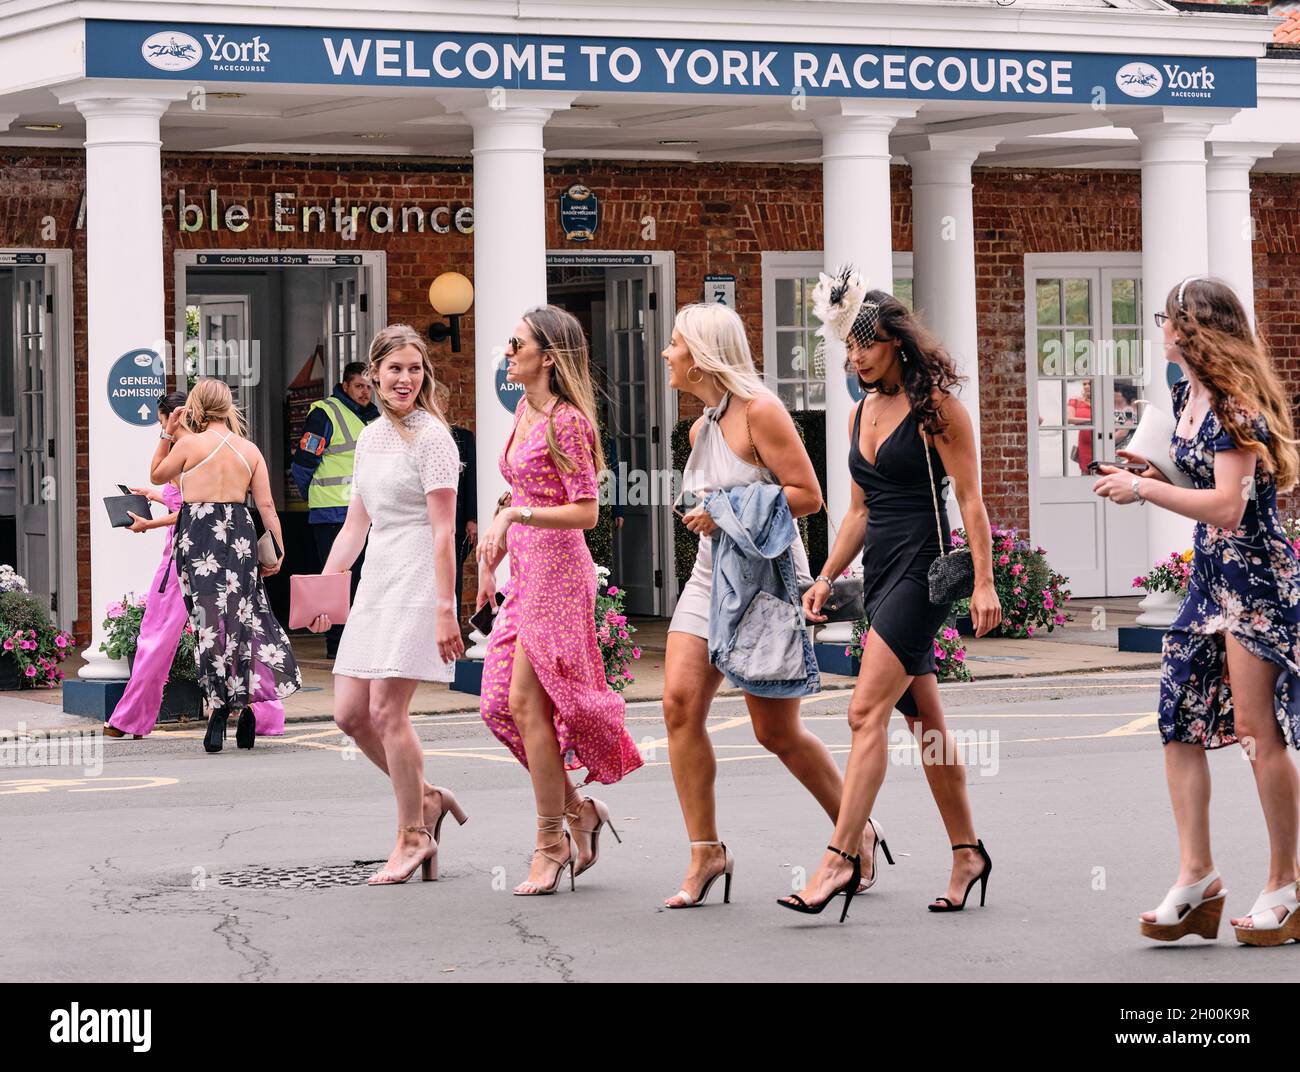 Racegoers all dressed up for a day's horse racing on a summer weekend event at York Racecourse York, North Yorkshire, England UK 2021 Stock Photo